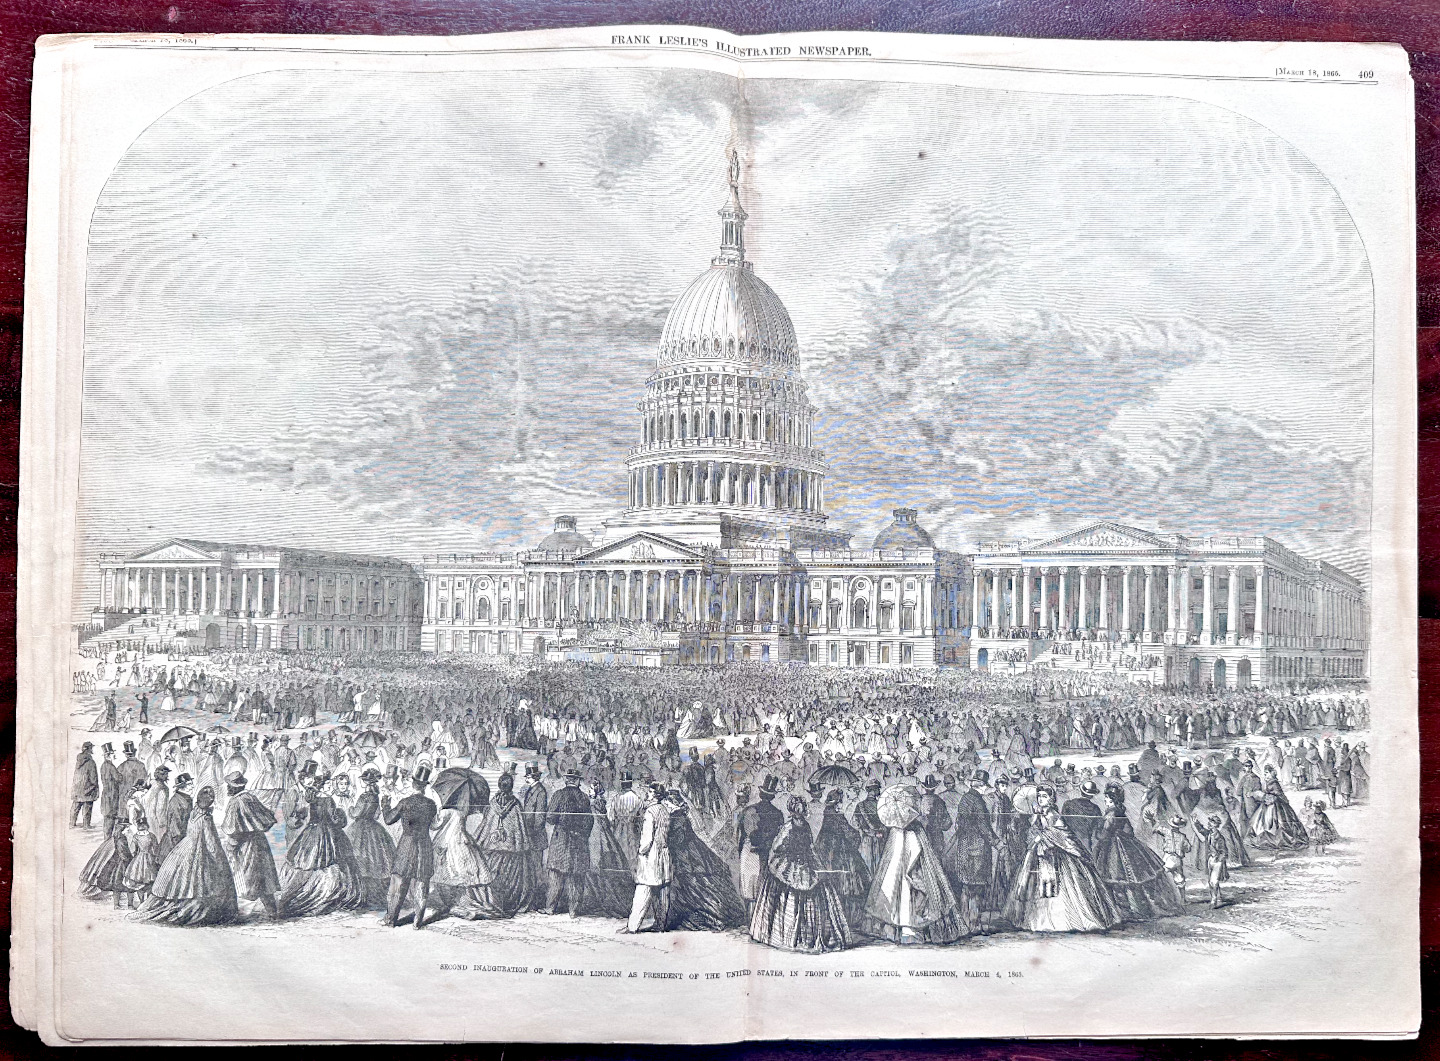 MARCH 18, 1865 FRANK LESLIE'S ILLUSTRATED NEWSPAPER, LINCOLN'S 2ND INAUGURATION